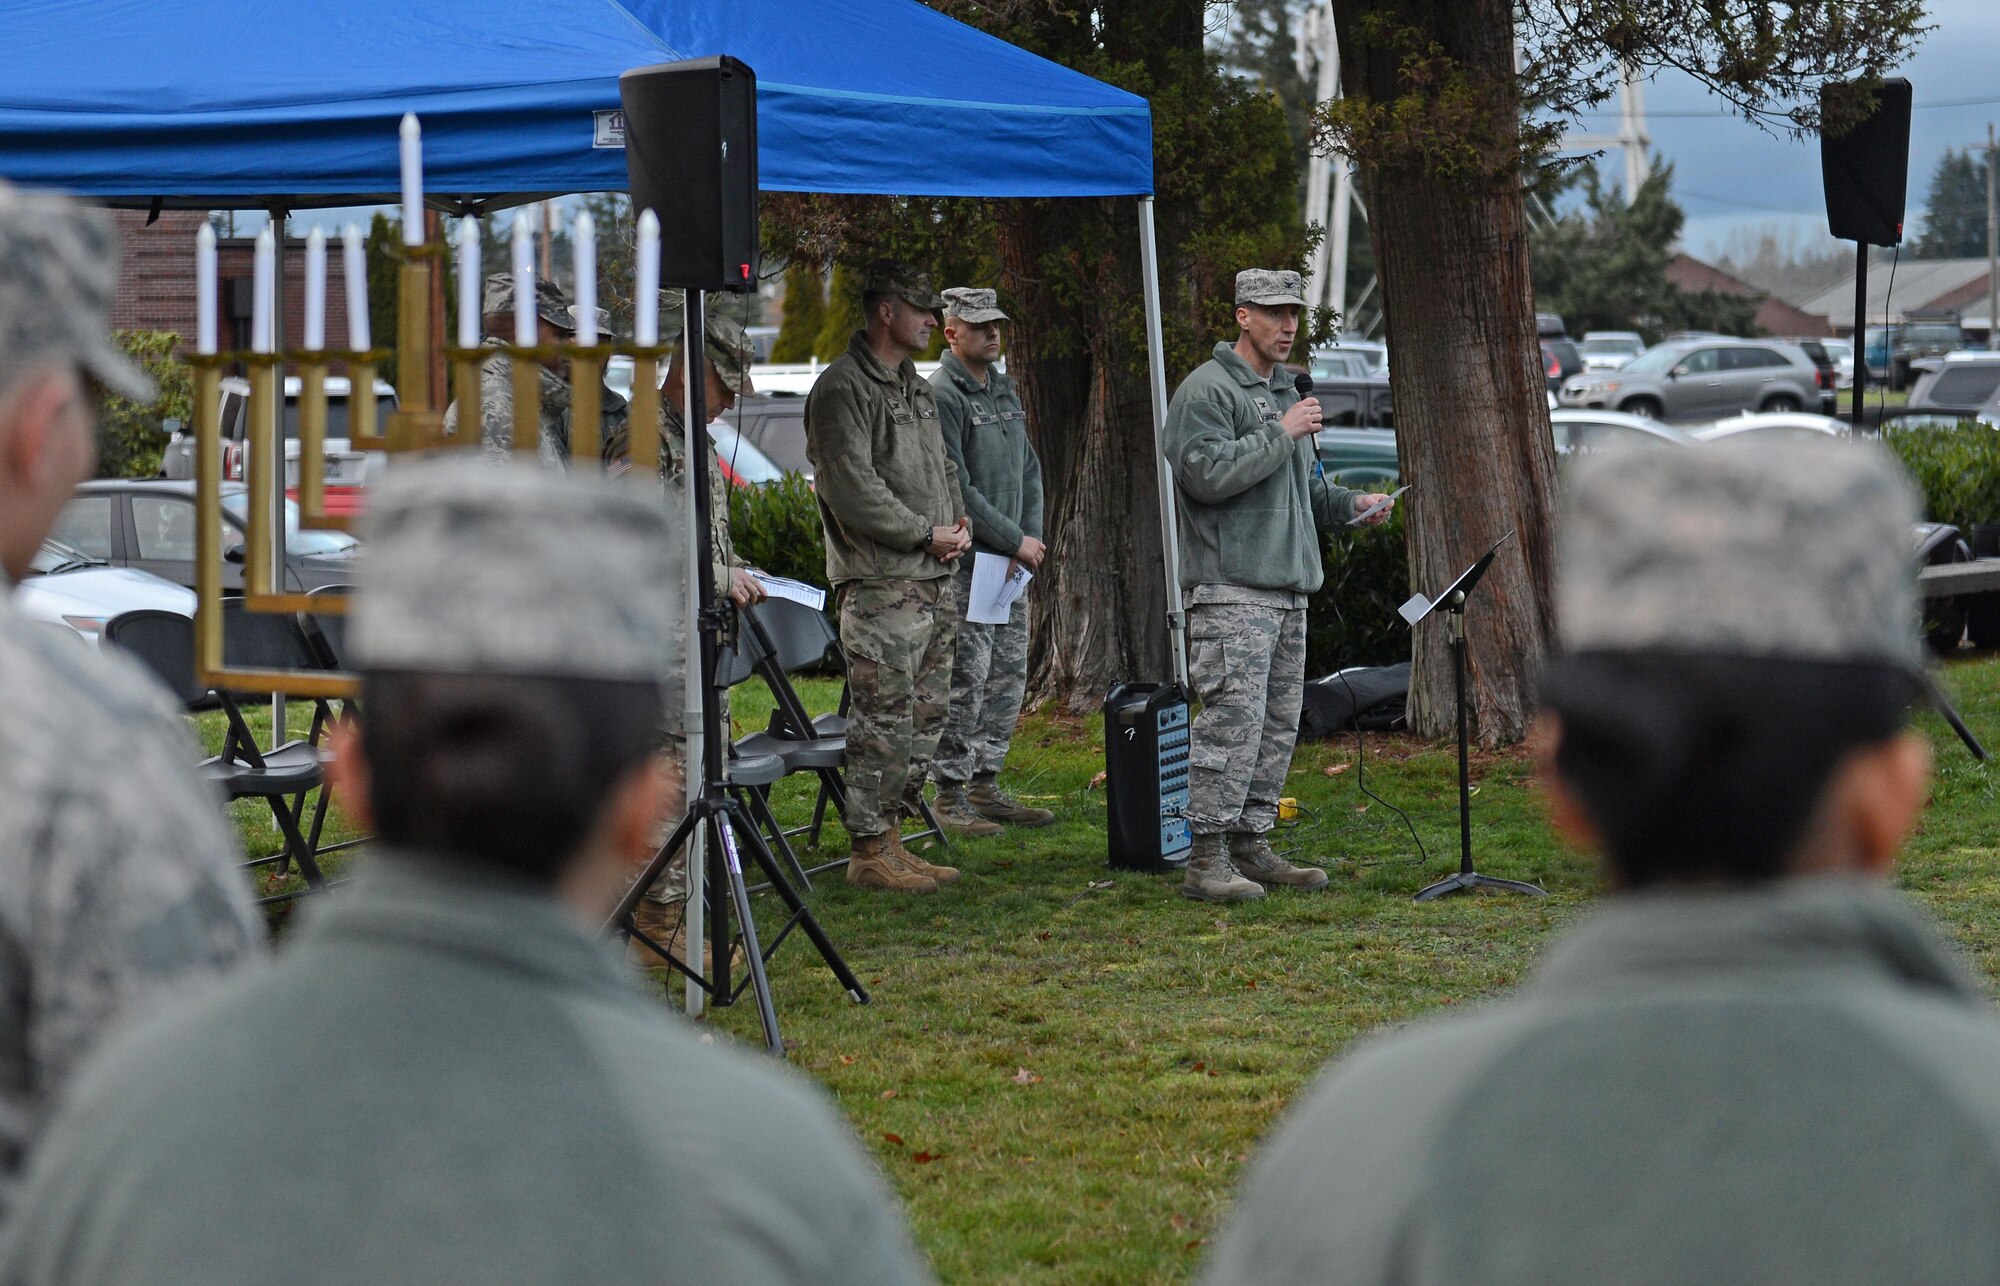 Col. Leonard Kosinski, 62nd Airlift Wing commander, speaks with service members during the McChord Field Annual Tree Lighting Ceremony Dec. 5, 2016 at Joint Base Lewis-McChord, Wash. Following his speech, Kosinski, with the help of children lit the Menorah. (U.S. Air Force photo/Senior Airman Divine Cox)